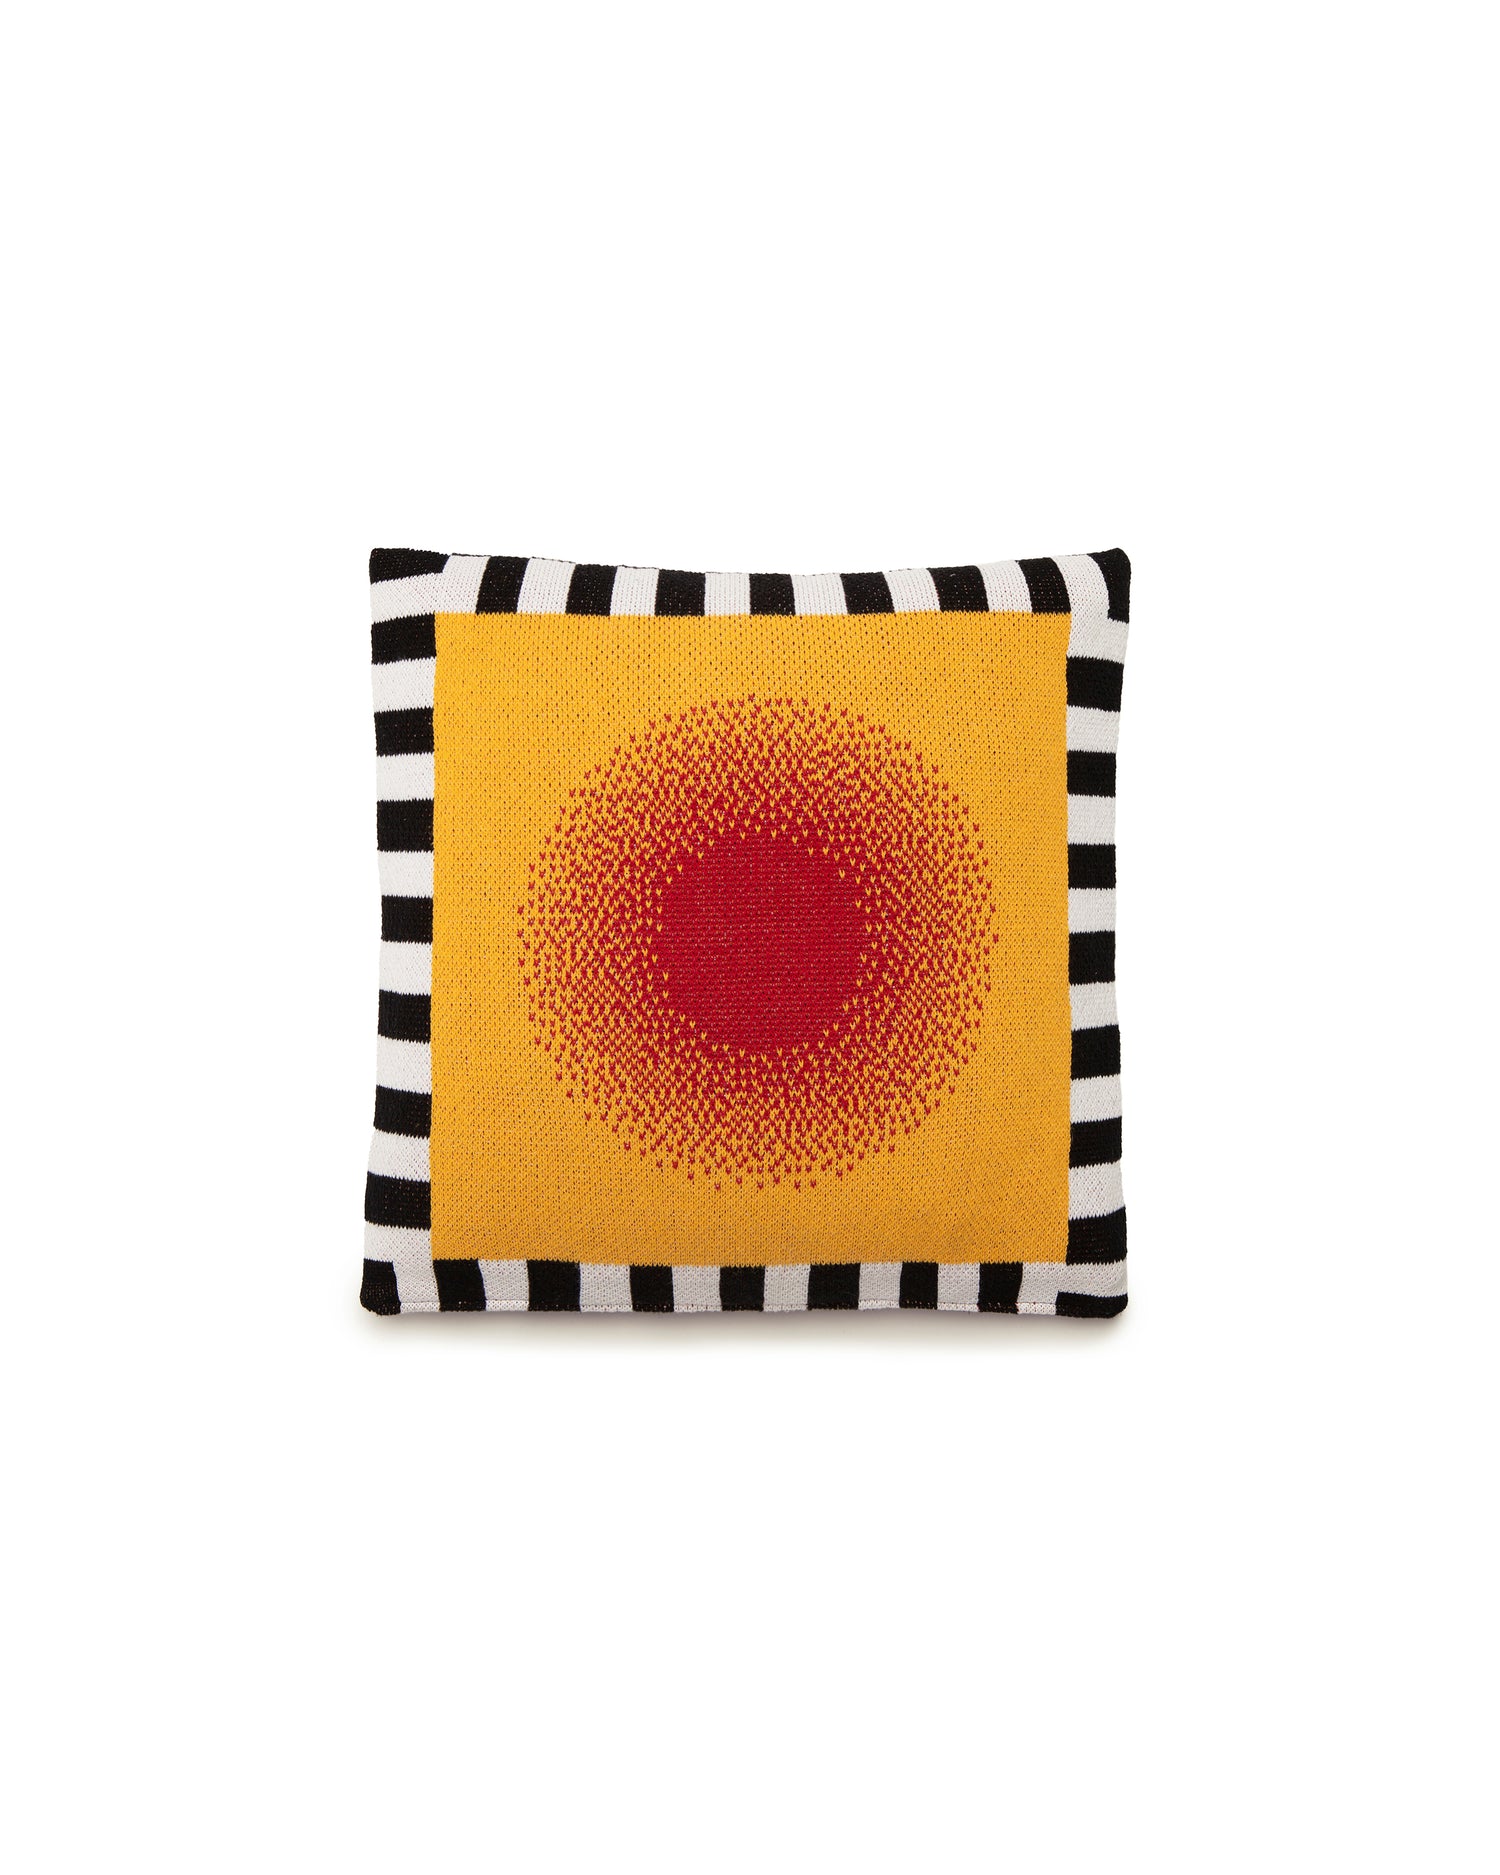 Image of reverse side of knit burst pillow cover showing the side that has a red circle gradually fading into a yellow background with a black and white stripe border along the entirety of the cover. 